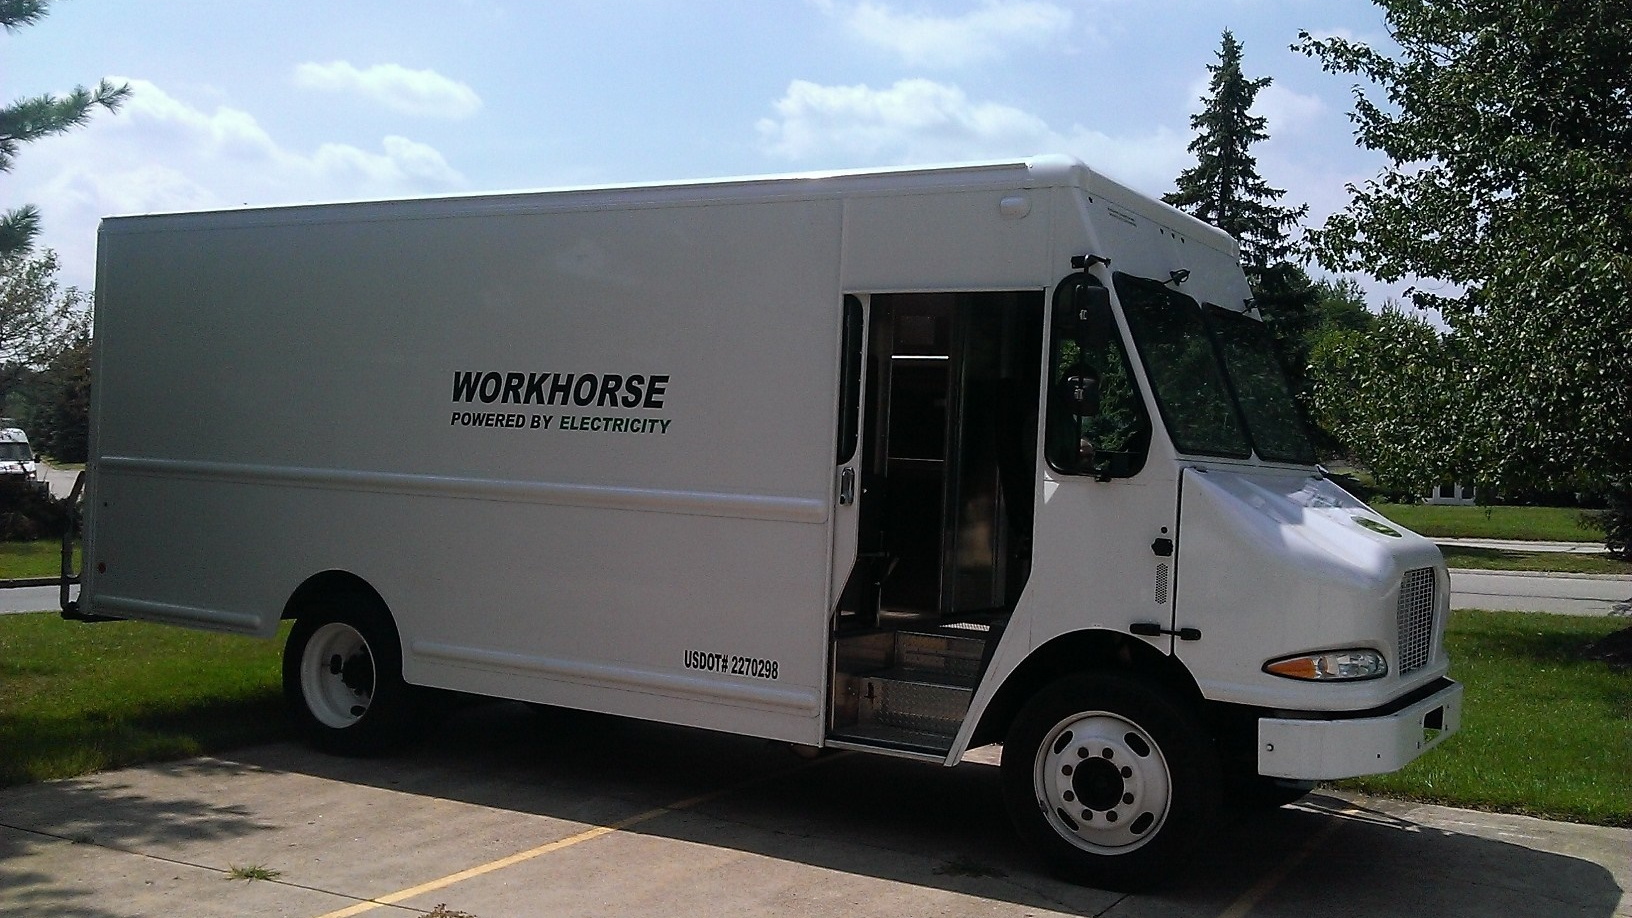 Workhorse Walk-In van, now produced by Amp Holdings and electrically powered